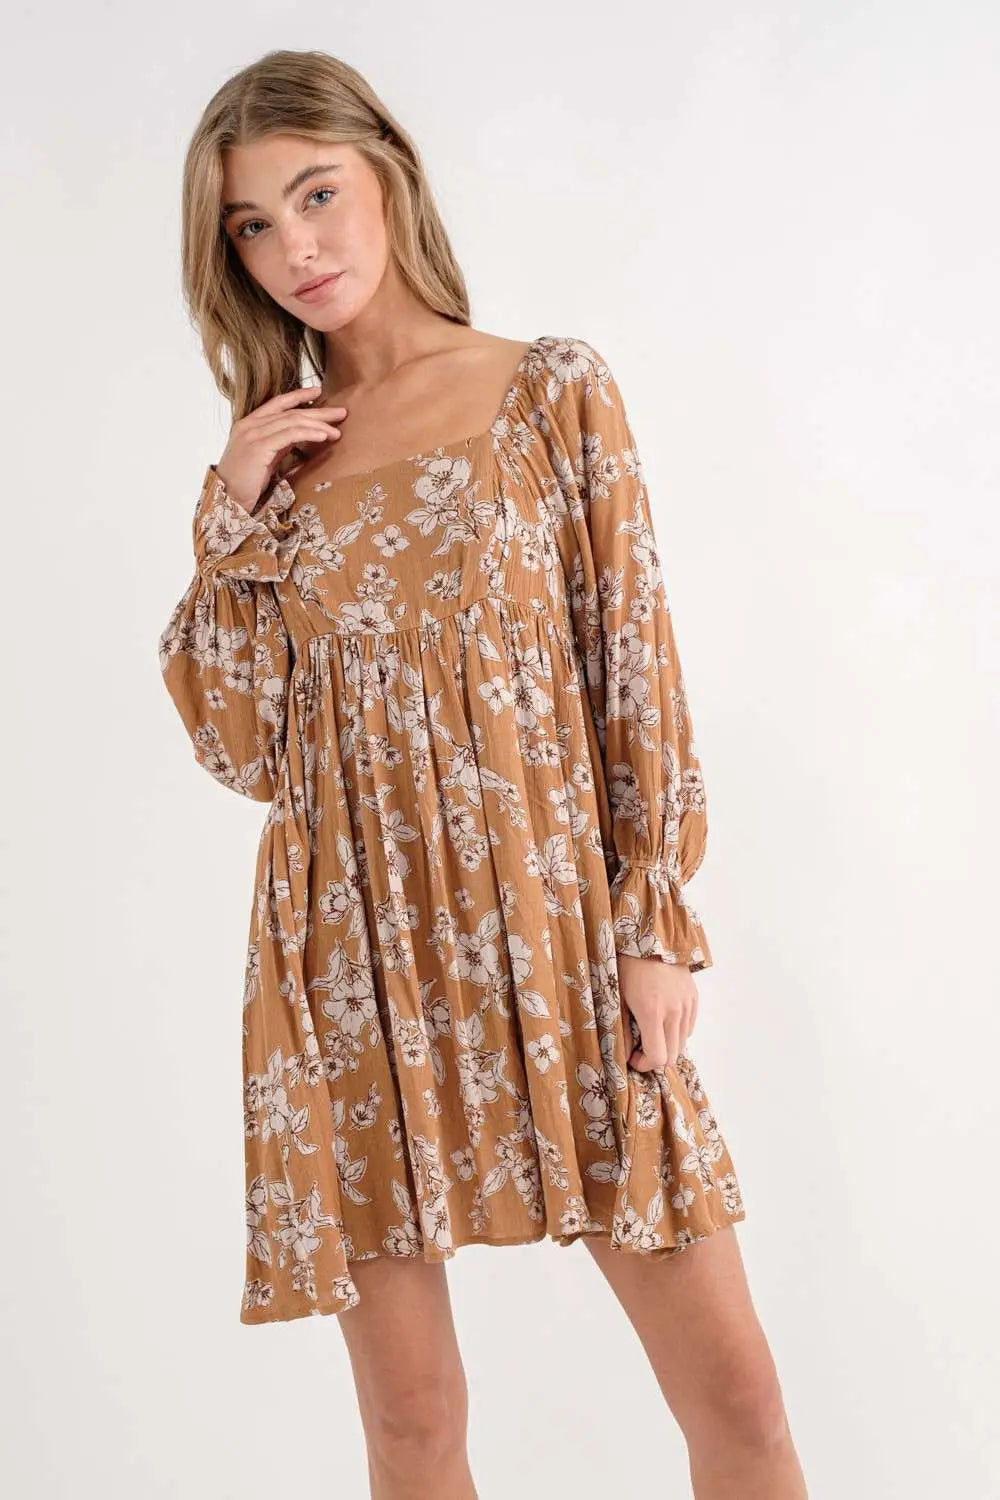 the Fawn dress